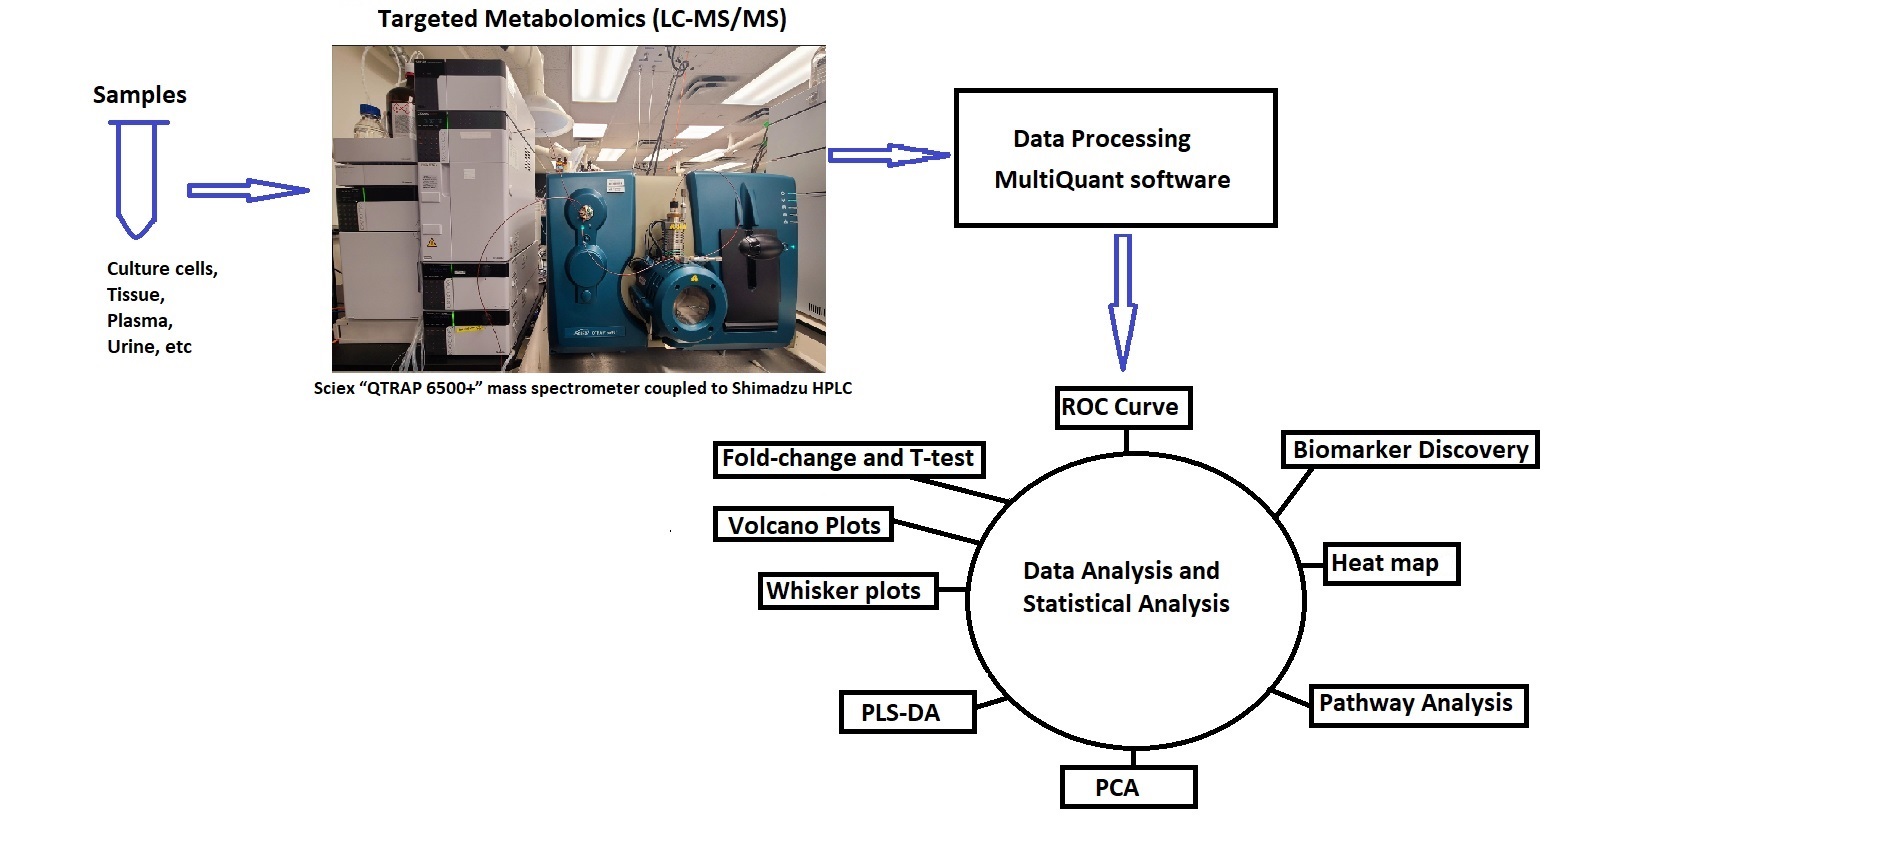 Diagram outlining the targeted metabolomics workflow from sample to data processing to ROC curve analysis